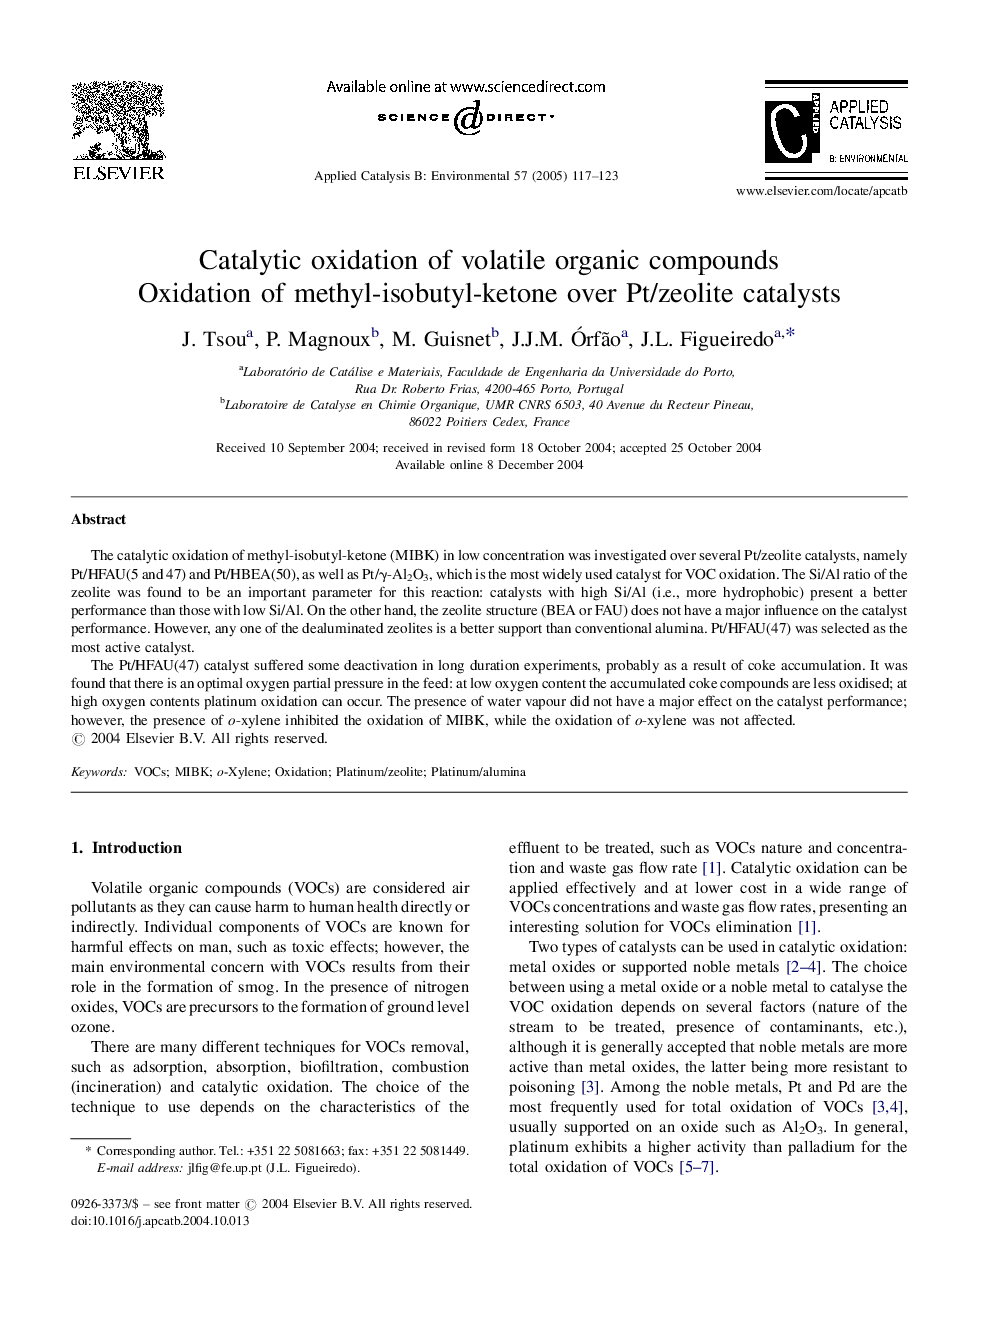 Catalytic oxidation of volatile organic compounds